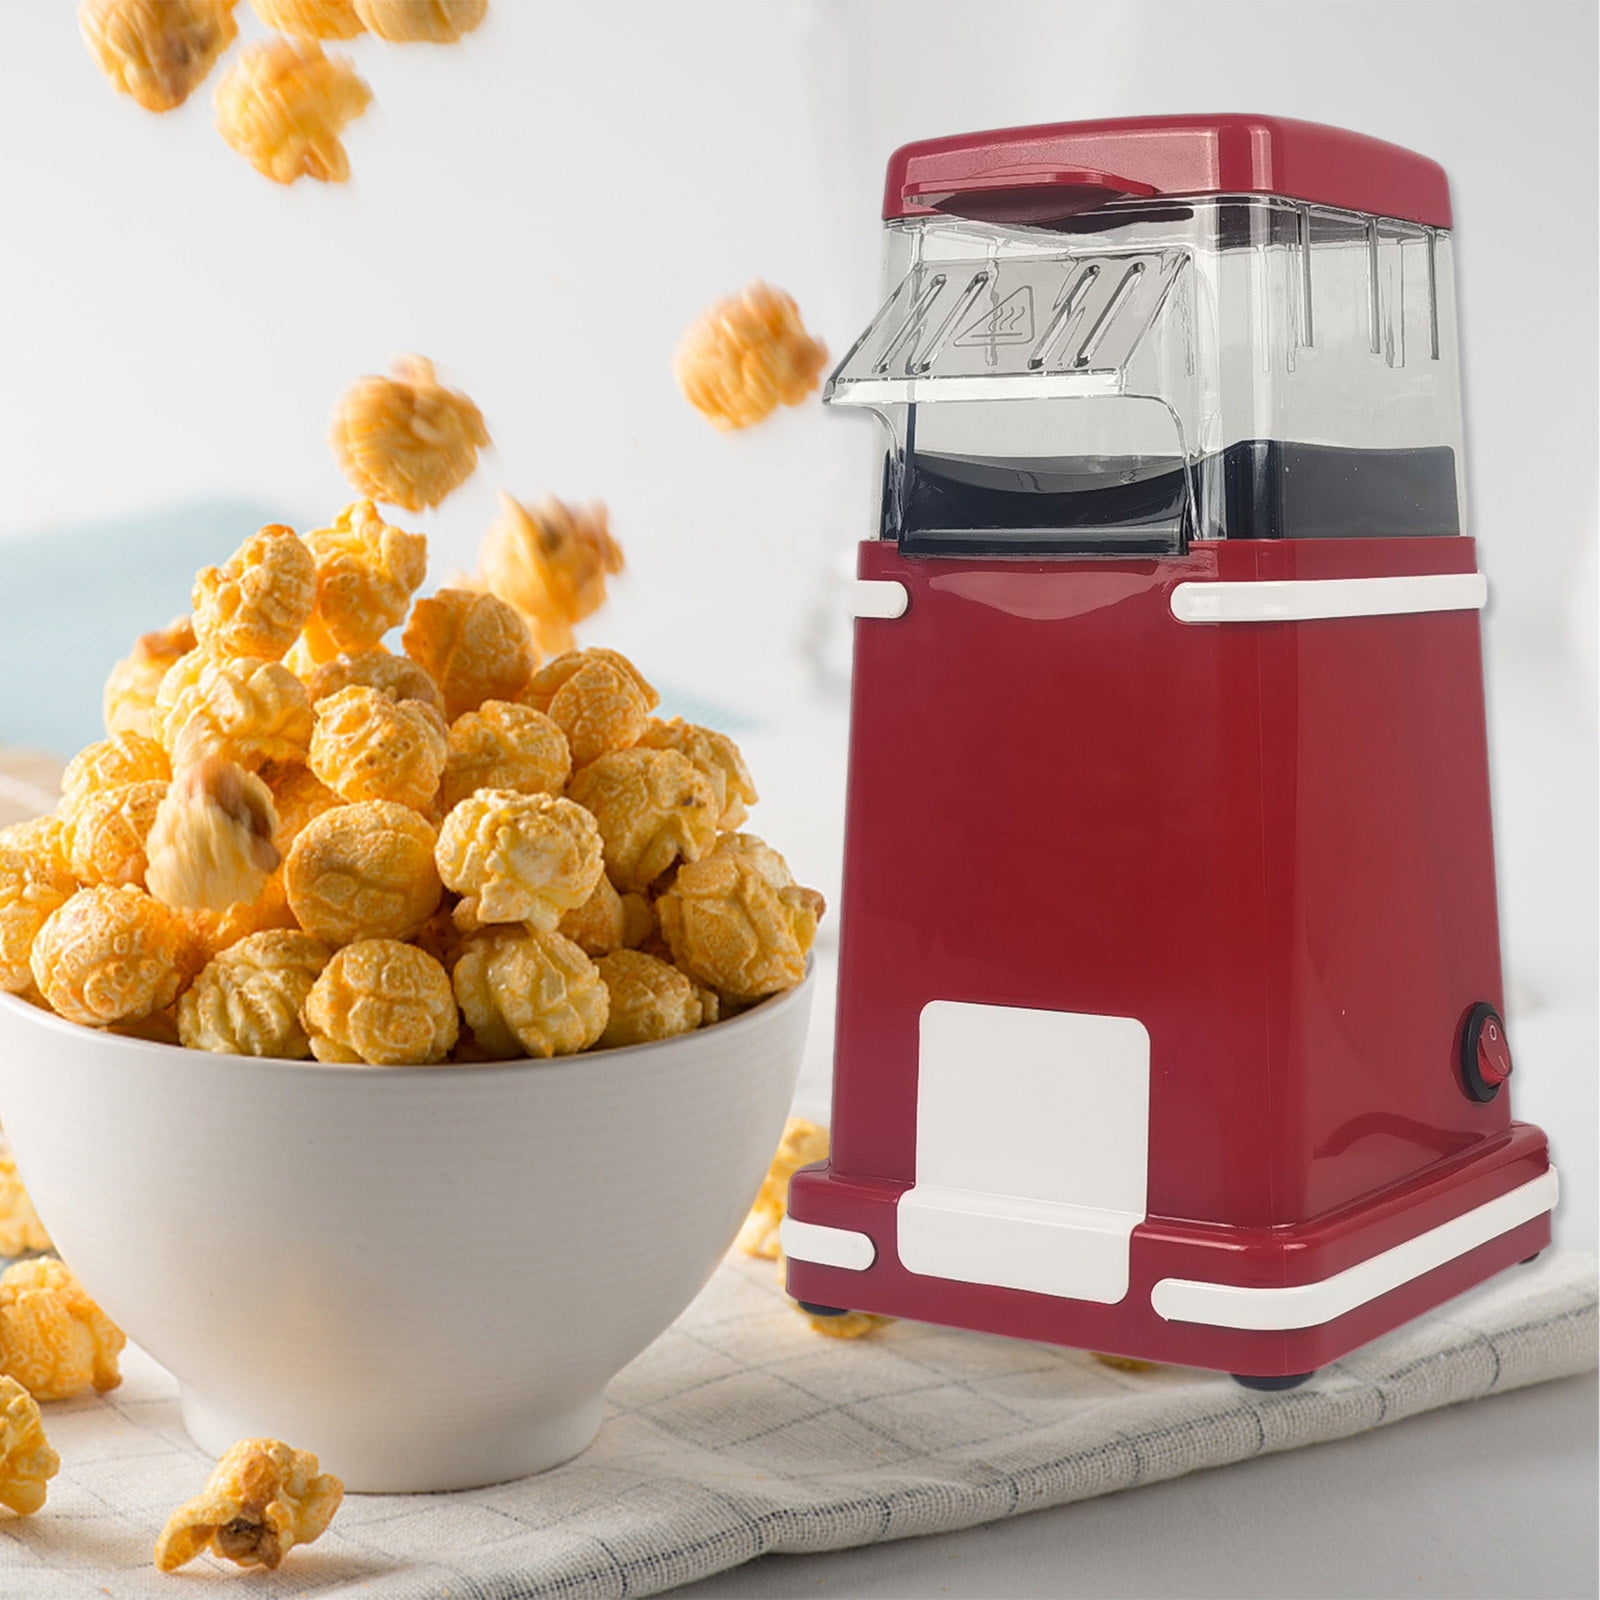 Go little ✨pop star✨ The Cravings x @wandpdesign Personal Popcorn Popper  was made with your snacking needs in mind. It can make up to 4…